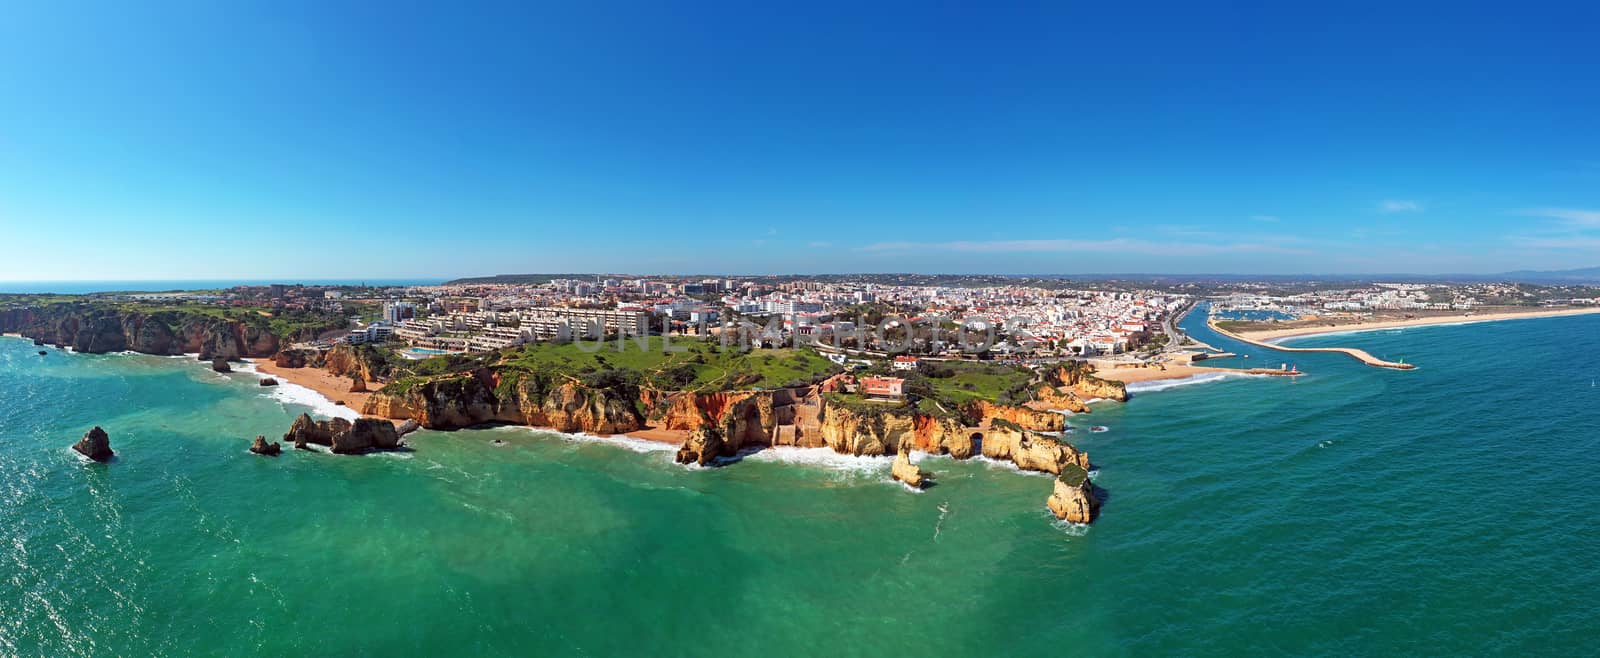 Panorama from the city Lagos in the Algarve Portugal by devy